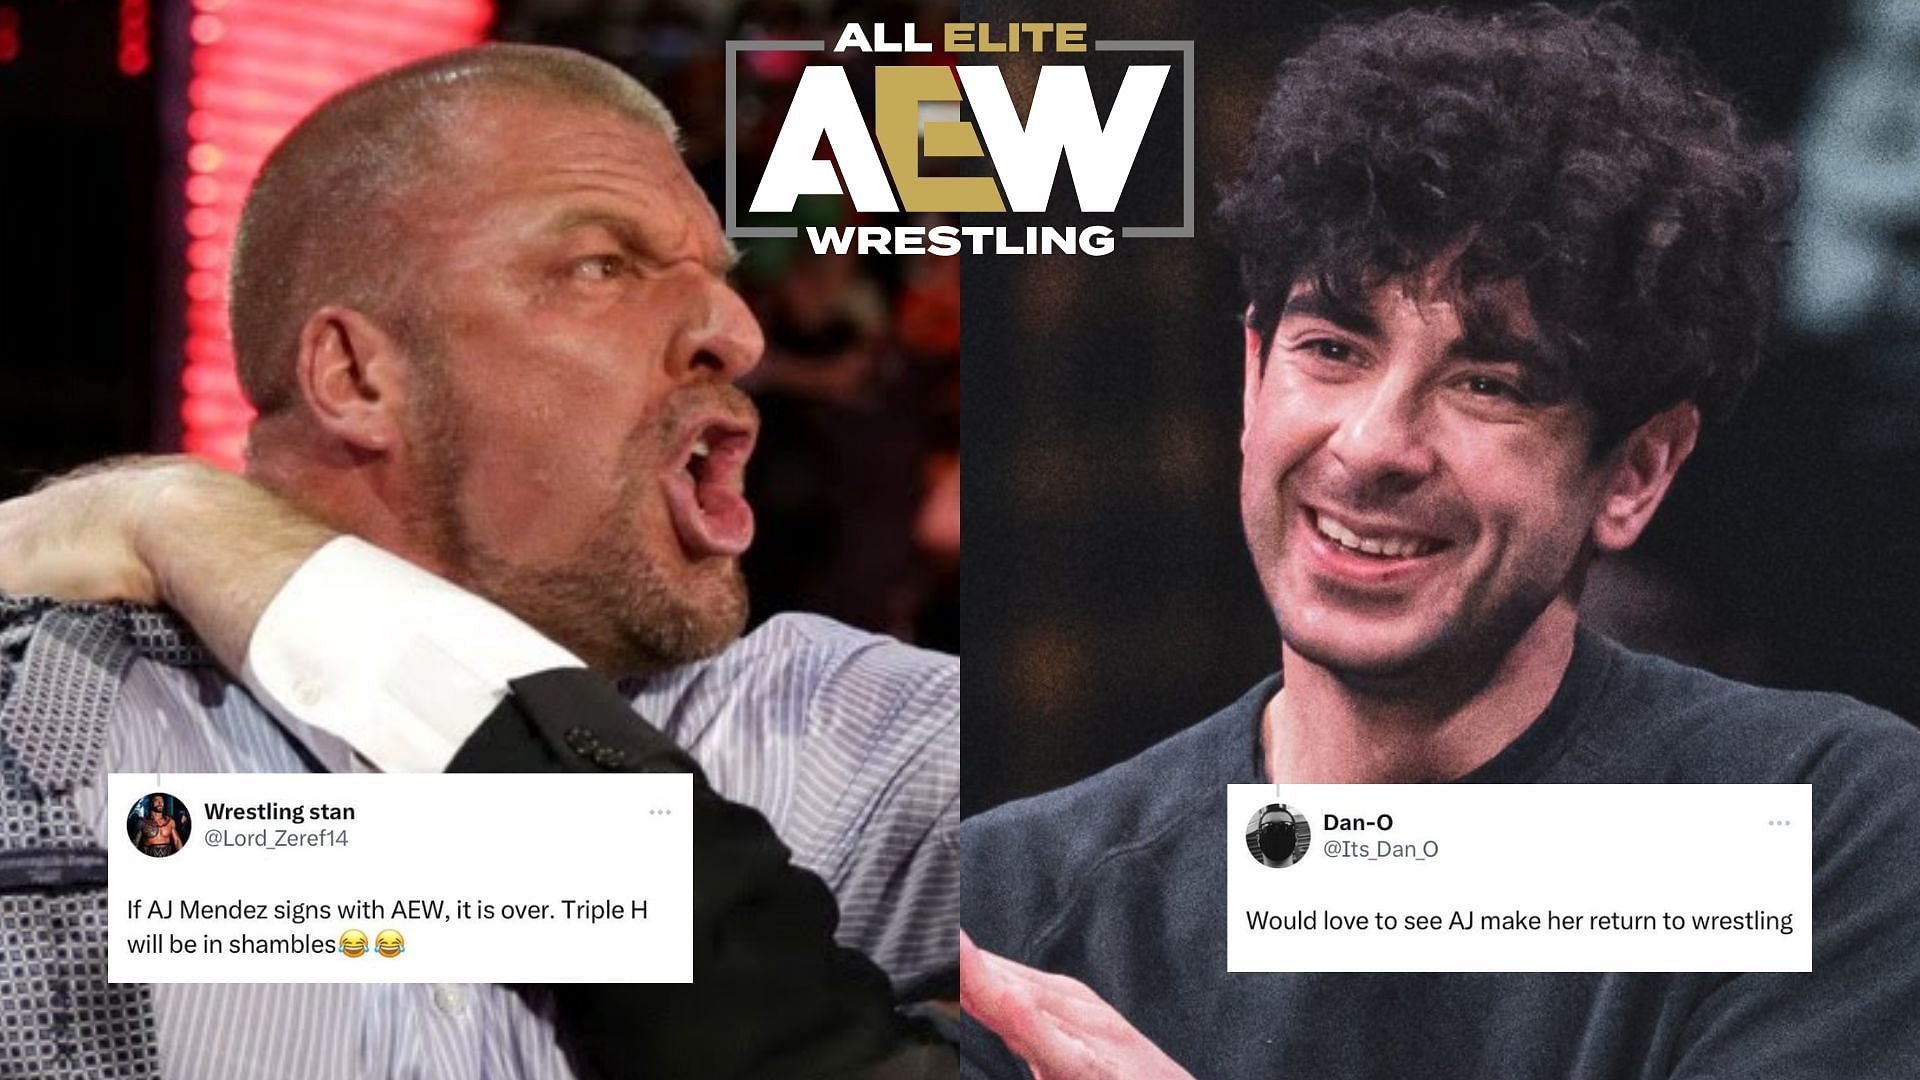 Fans have reacted to the thought of a former WWE Superstar joining AEW